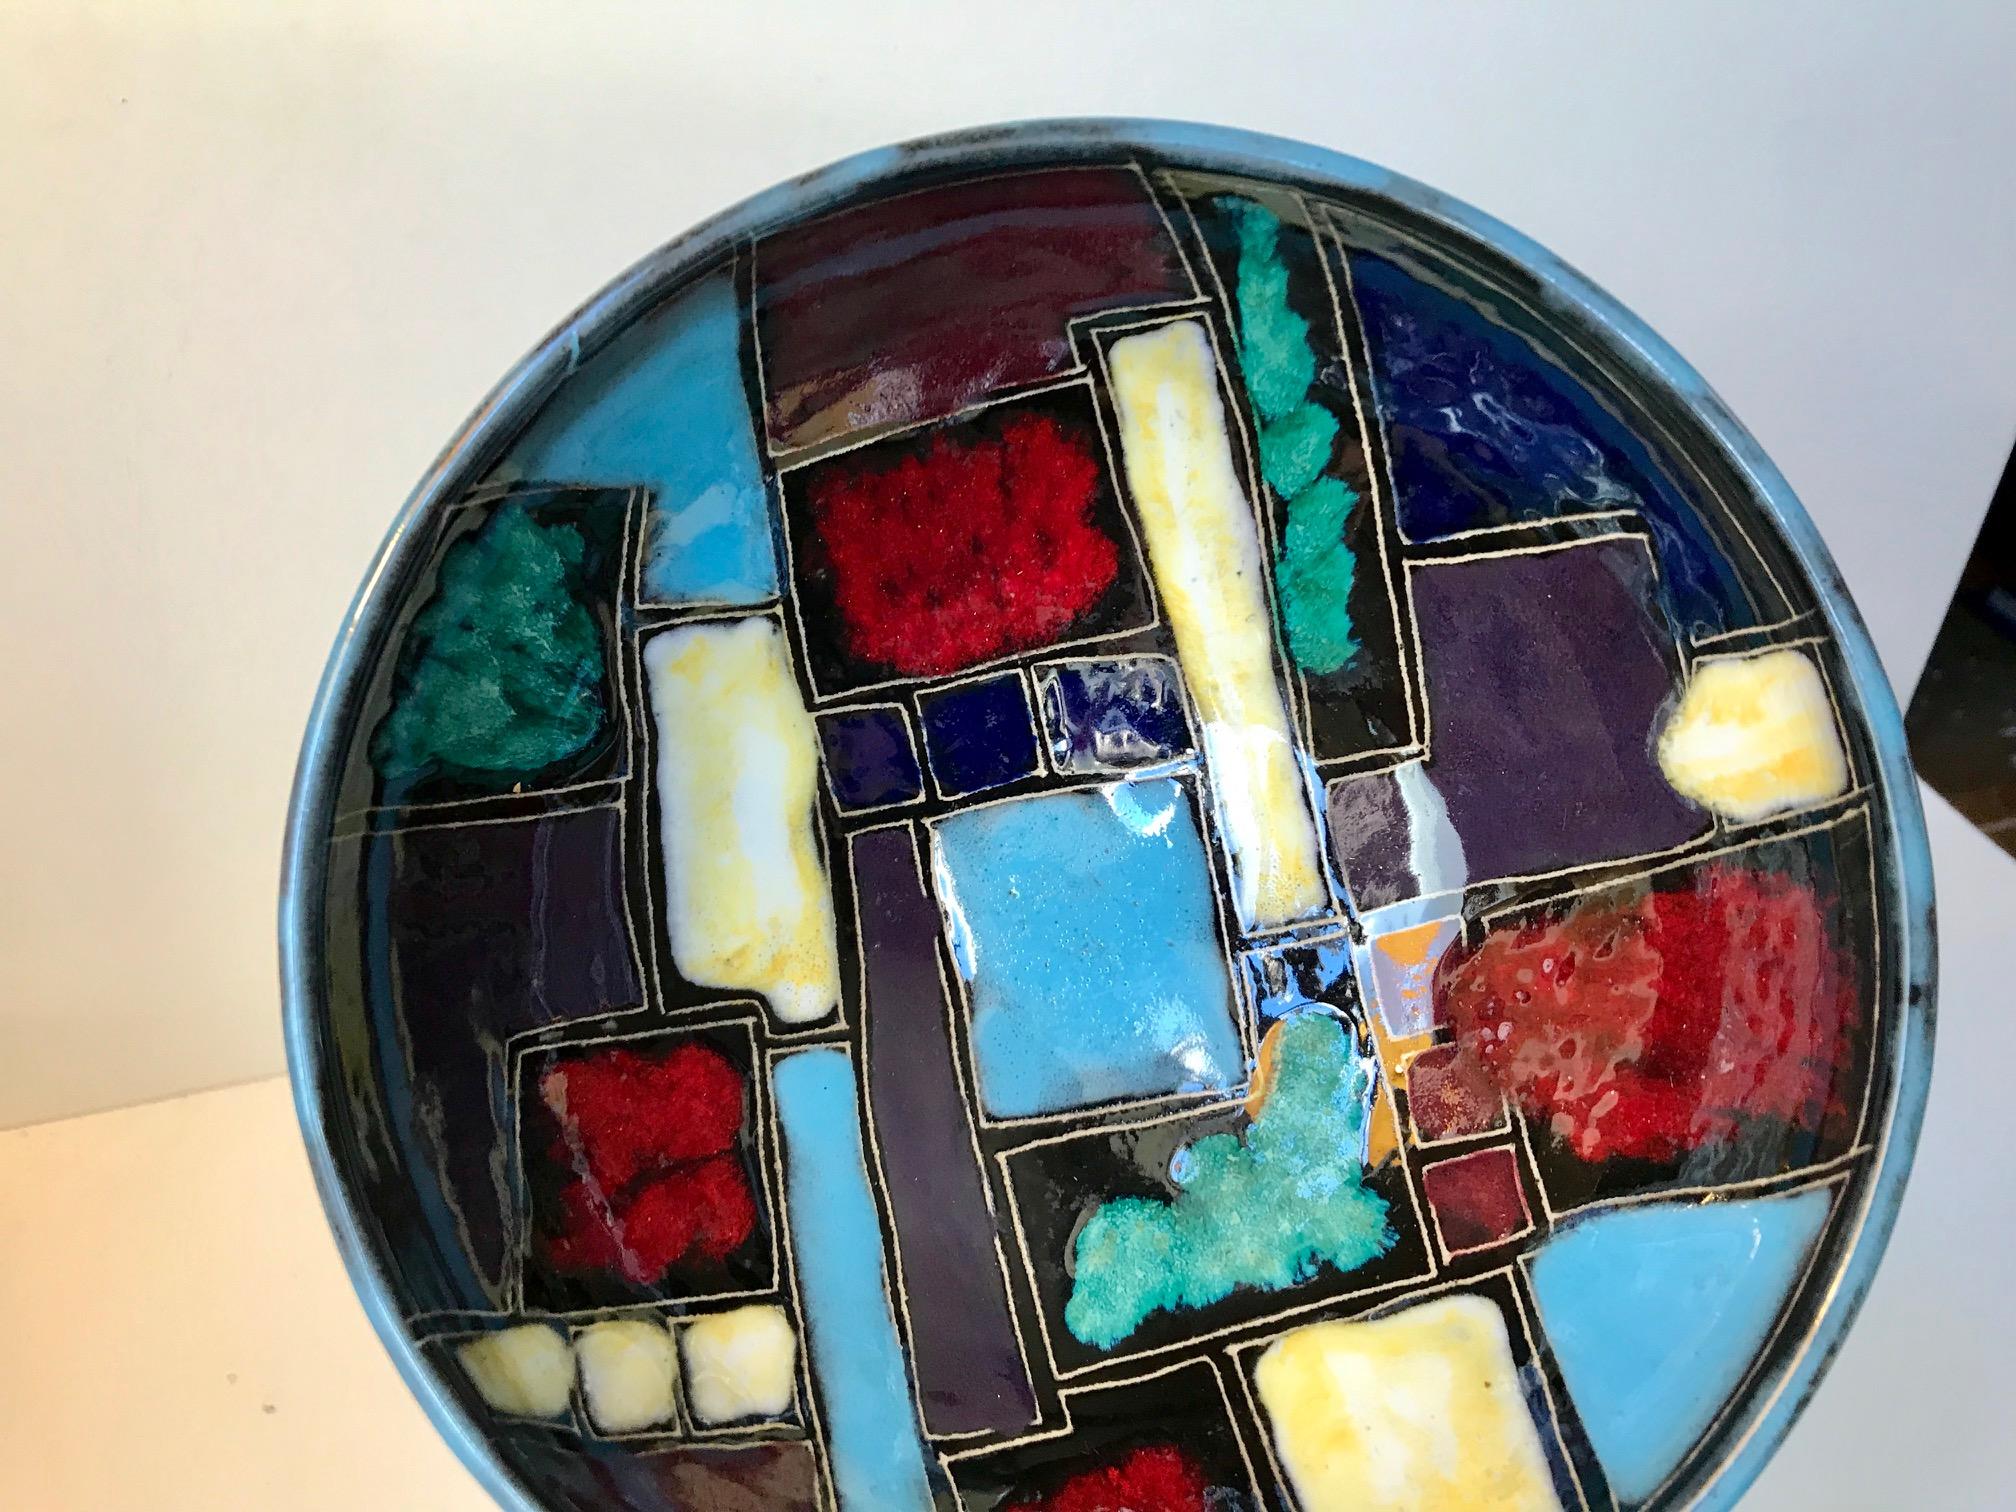 Unusual Italian ceramic dish with a palet of diffrent colored hand applied glazes. Anonymous designer or maker, circa 1960 in the style of Marcello Fantoni. The bowl has no markings.